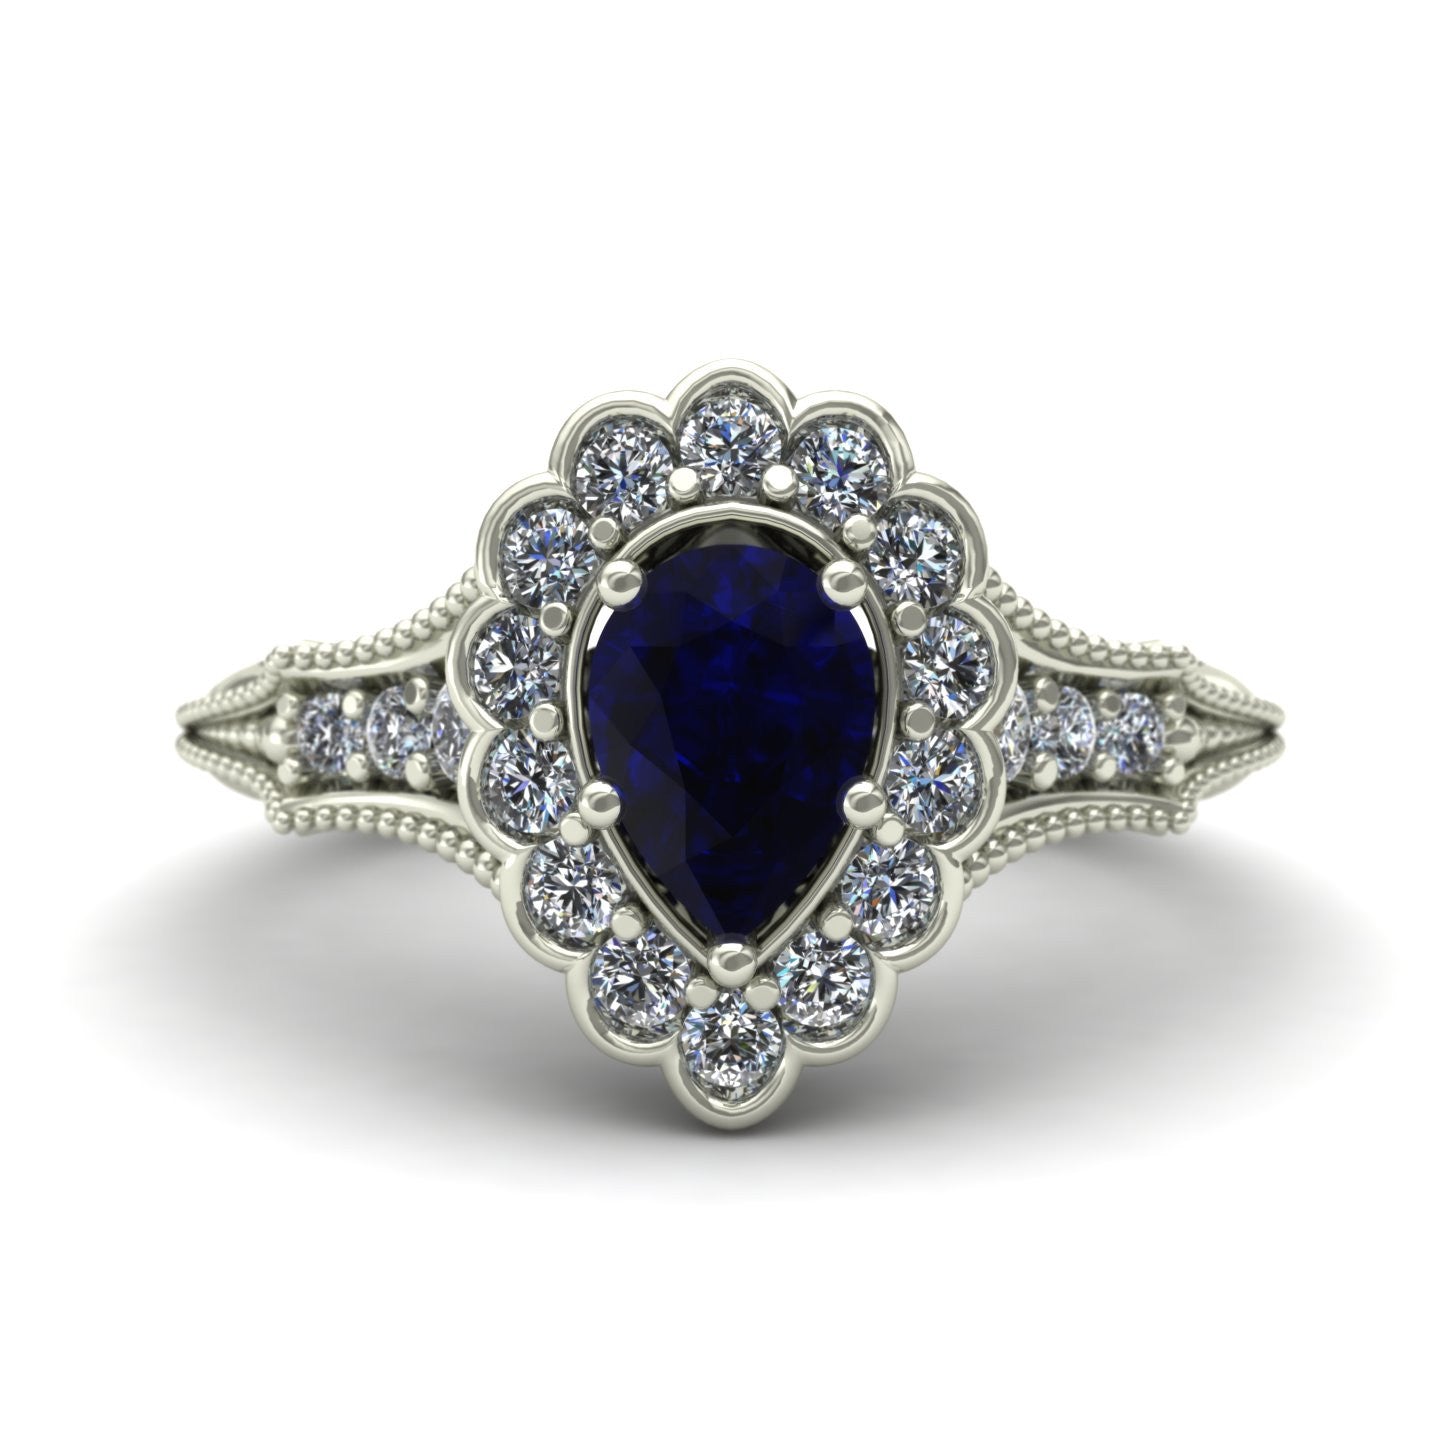 Pear blue sapphire and diamond vintage ring in 18k white gold - Charles Babb Designs - top view